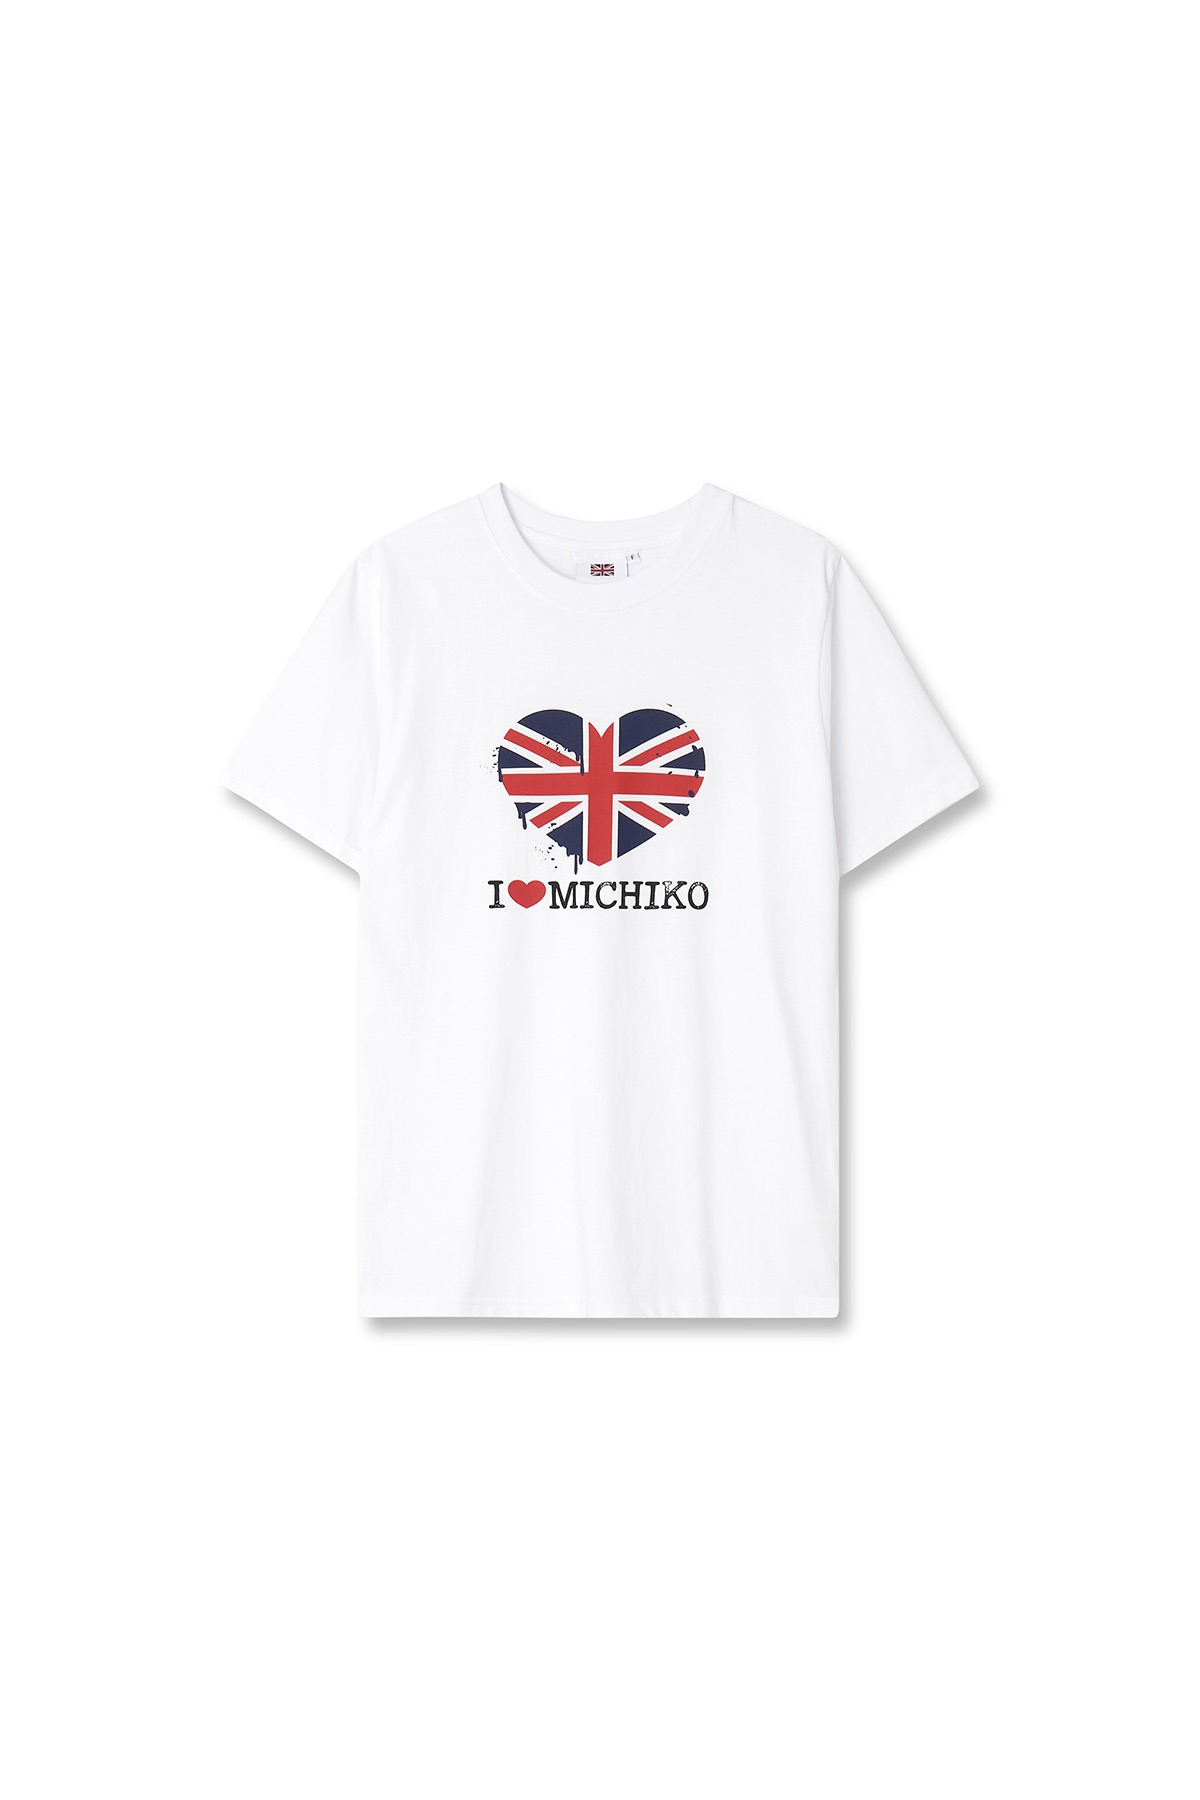 MELTING UNION JACK TOP WHITE_RELAXED FIT